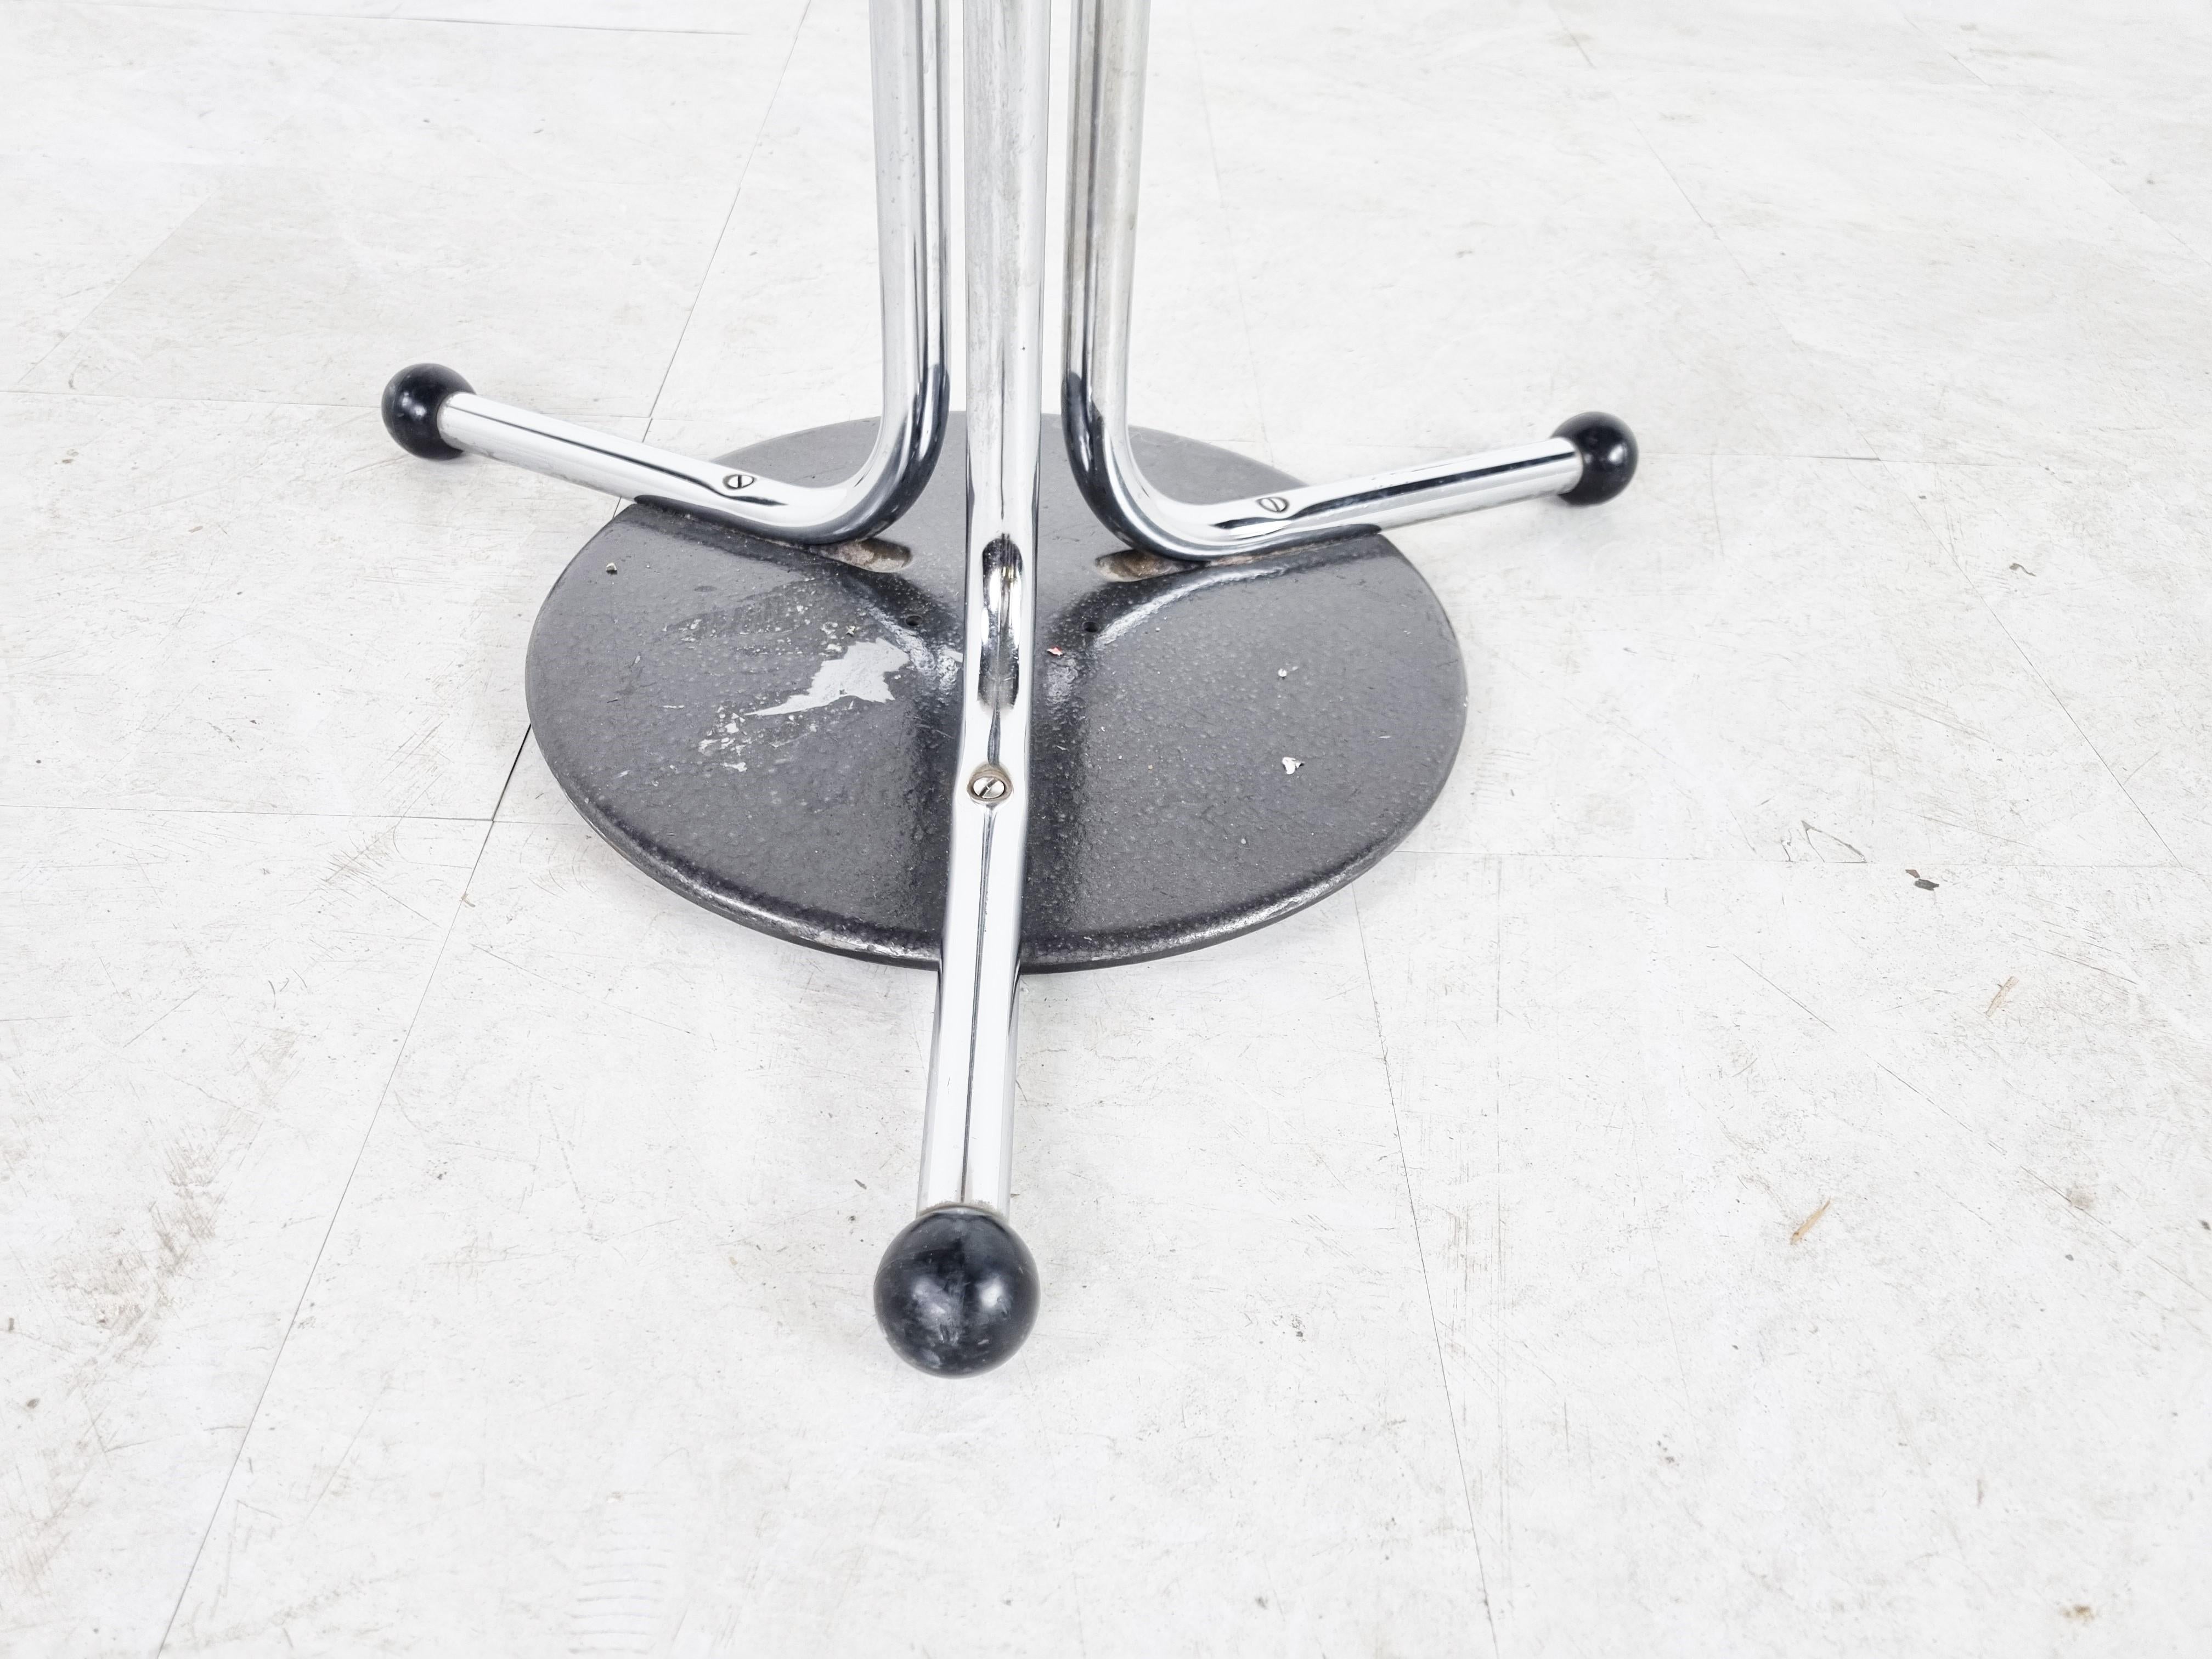 Vintage Chrome Coat Stands by Willy Van Der Meeren for Tubax, 1970s In Good Condition For Sale In HEVERLEE, BE